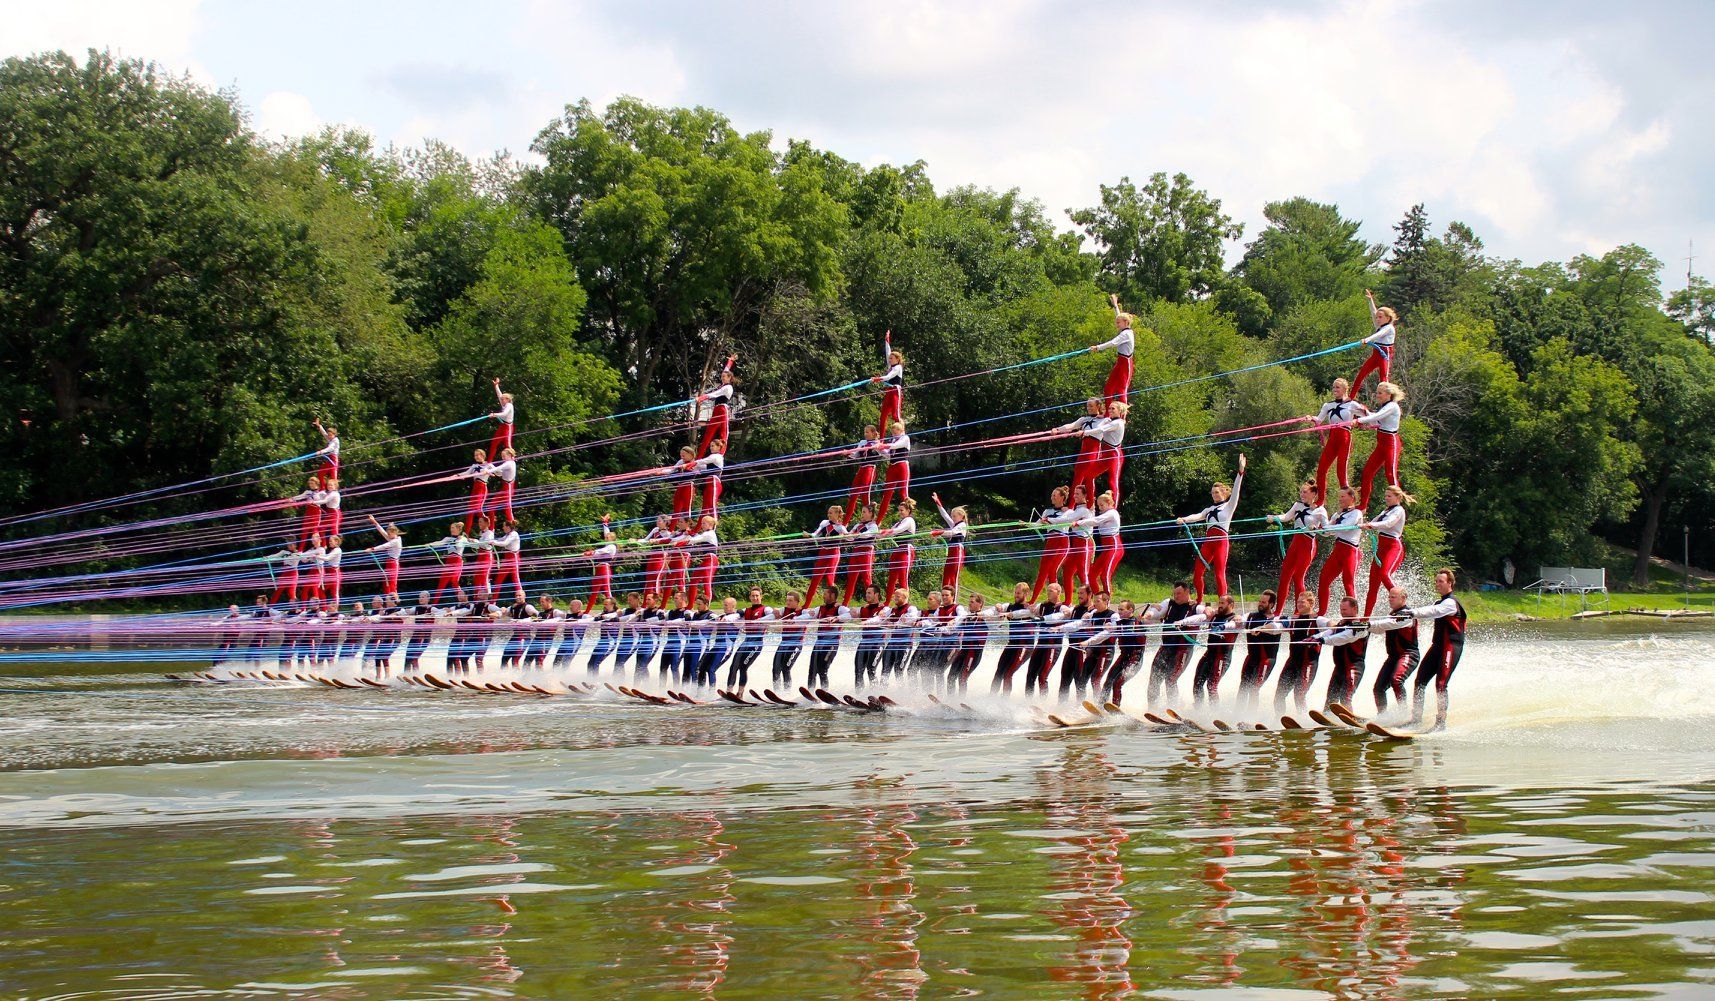 Largest human water skiing pyramid formation: world record set in Wisconsin